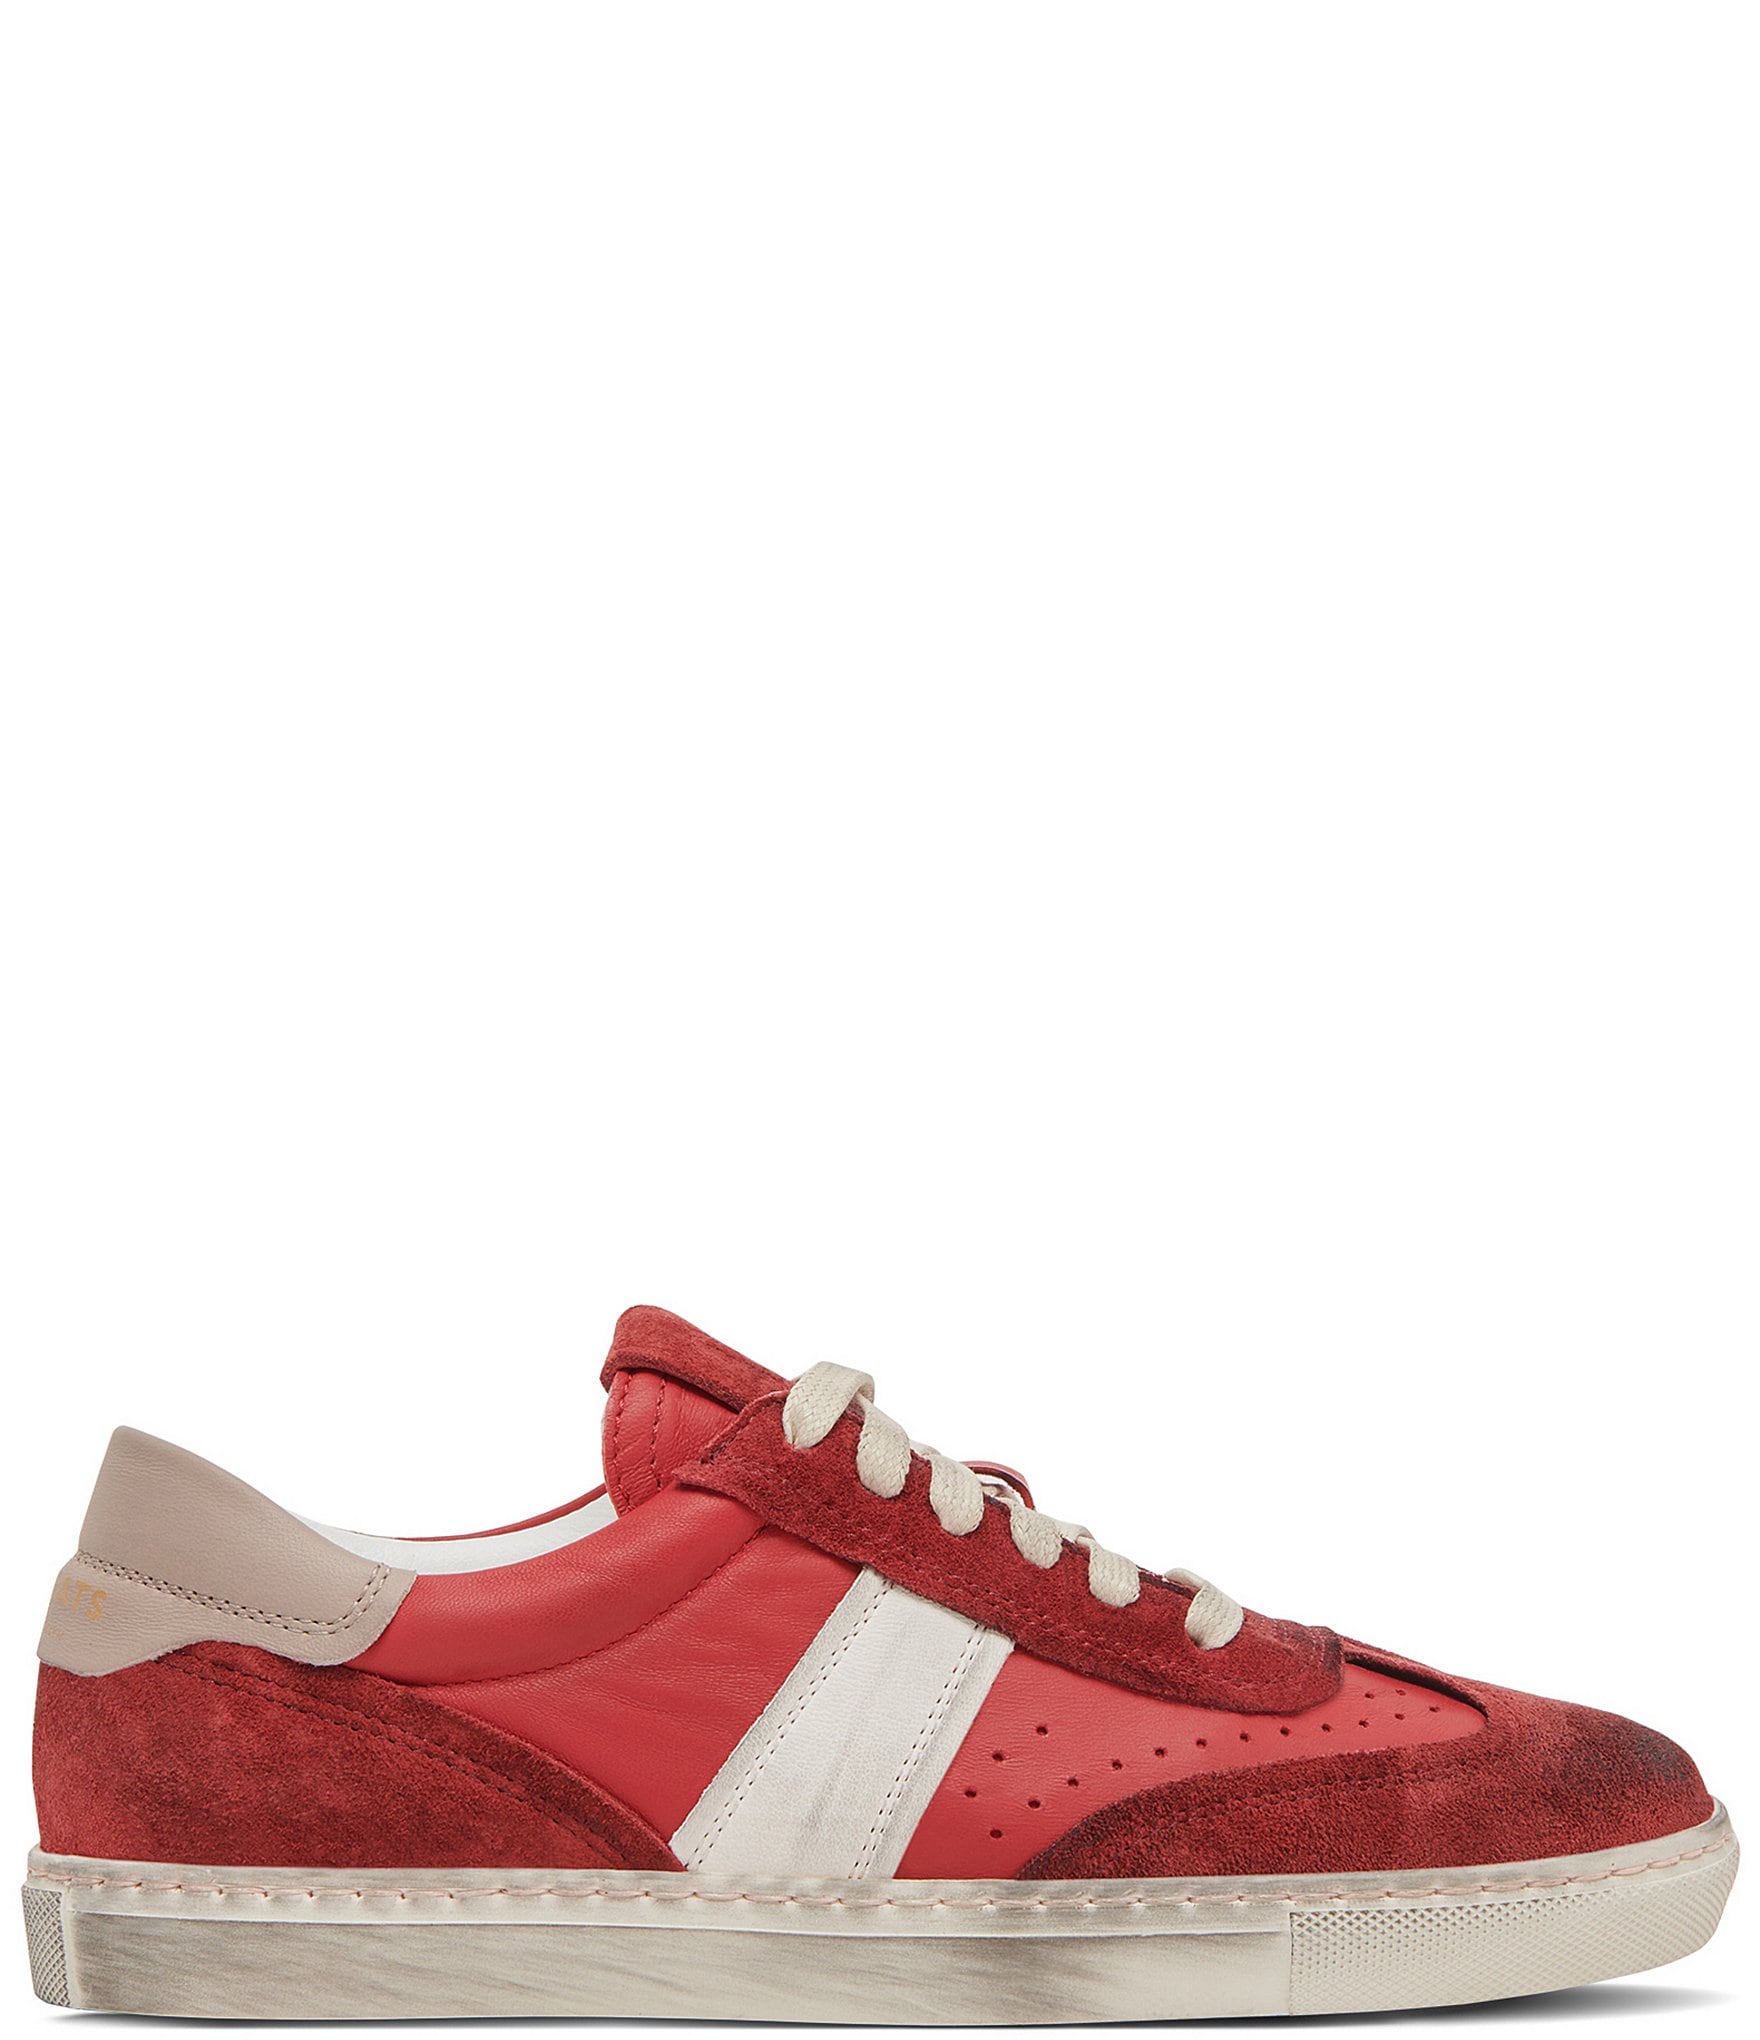 GREATS Charlie Distressed Leather and Suede Retro Sneakers | Dillard's